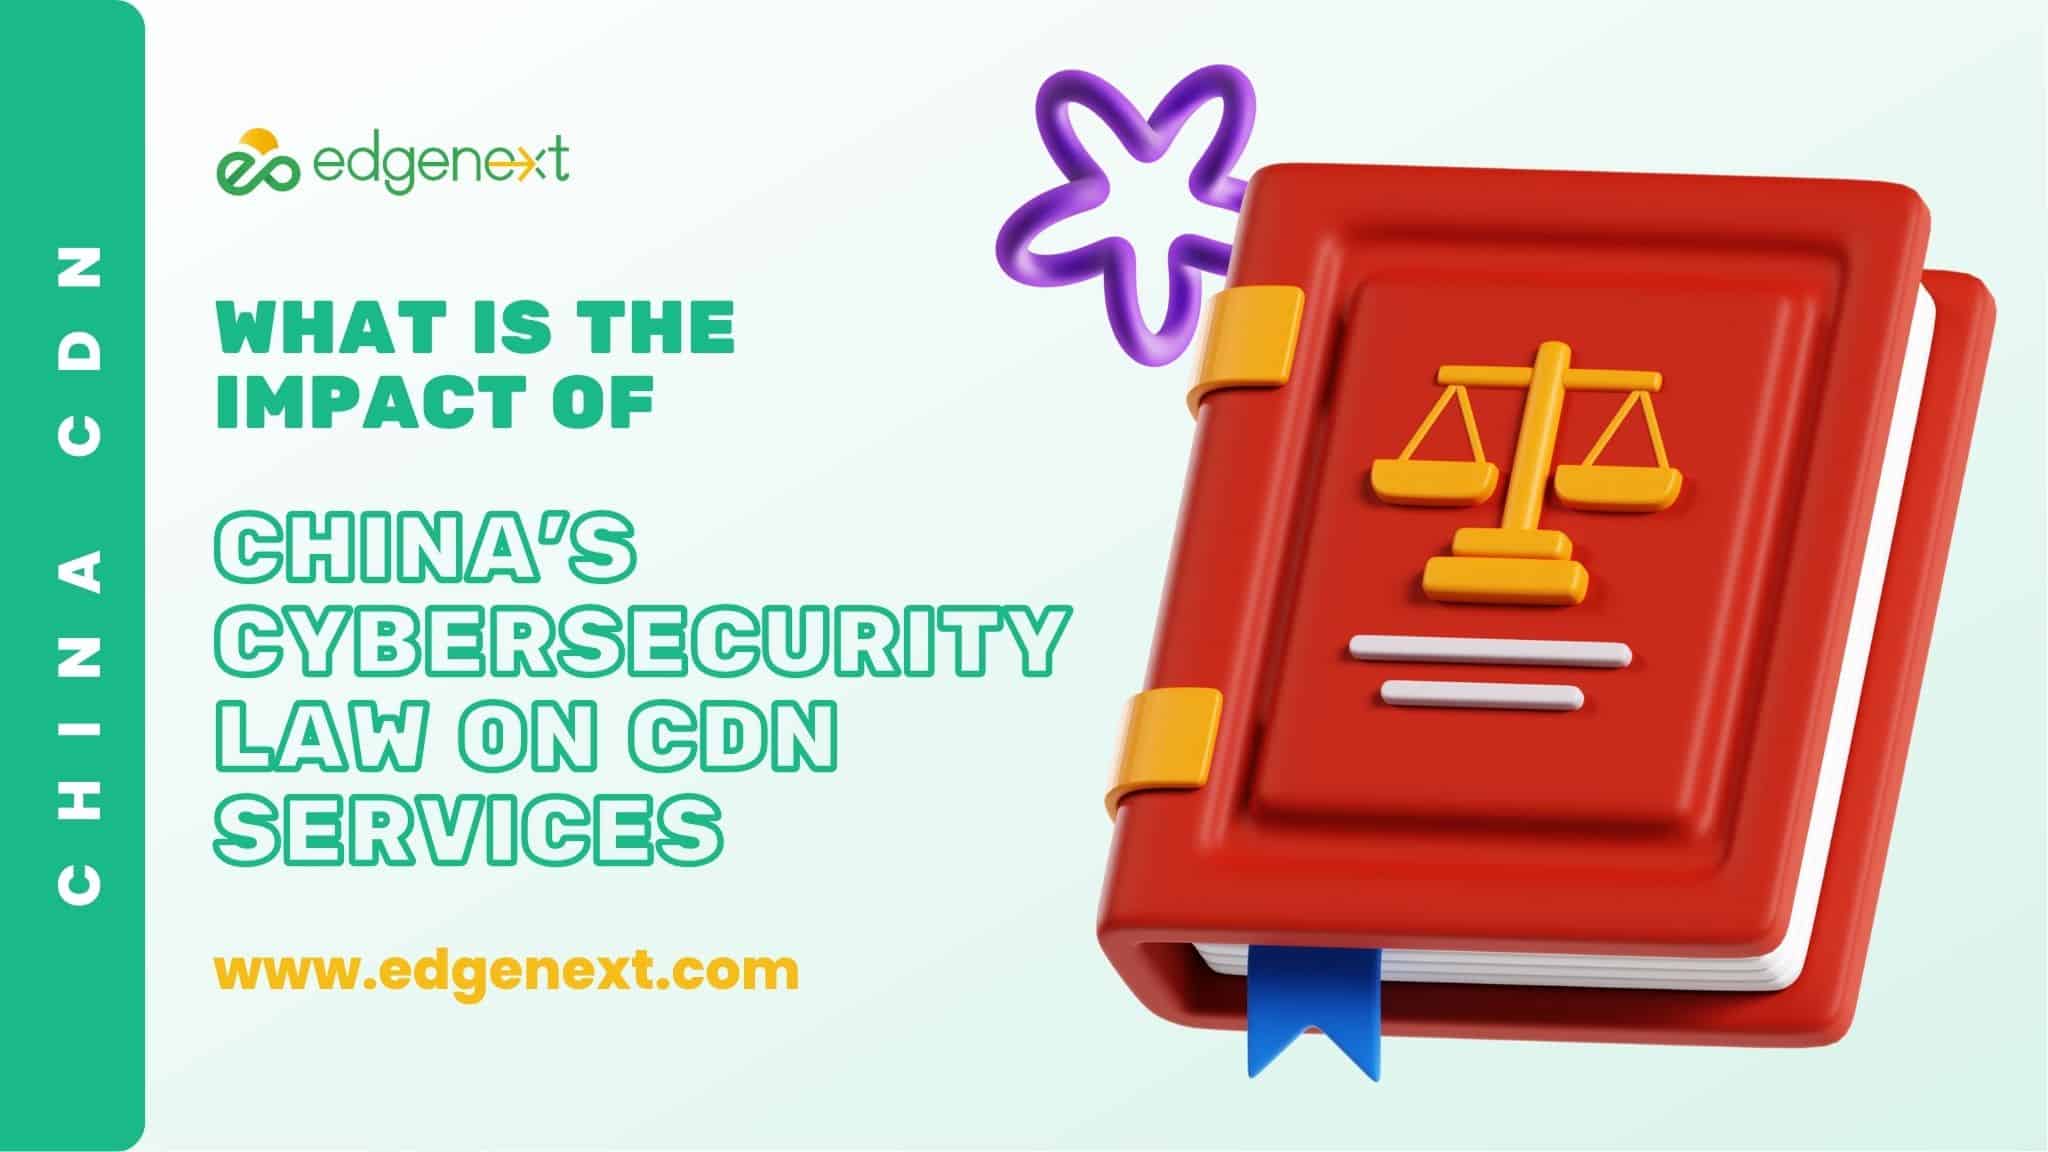 What is the Impact of China’s Cybersecurity Law on CDN Services?